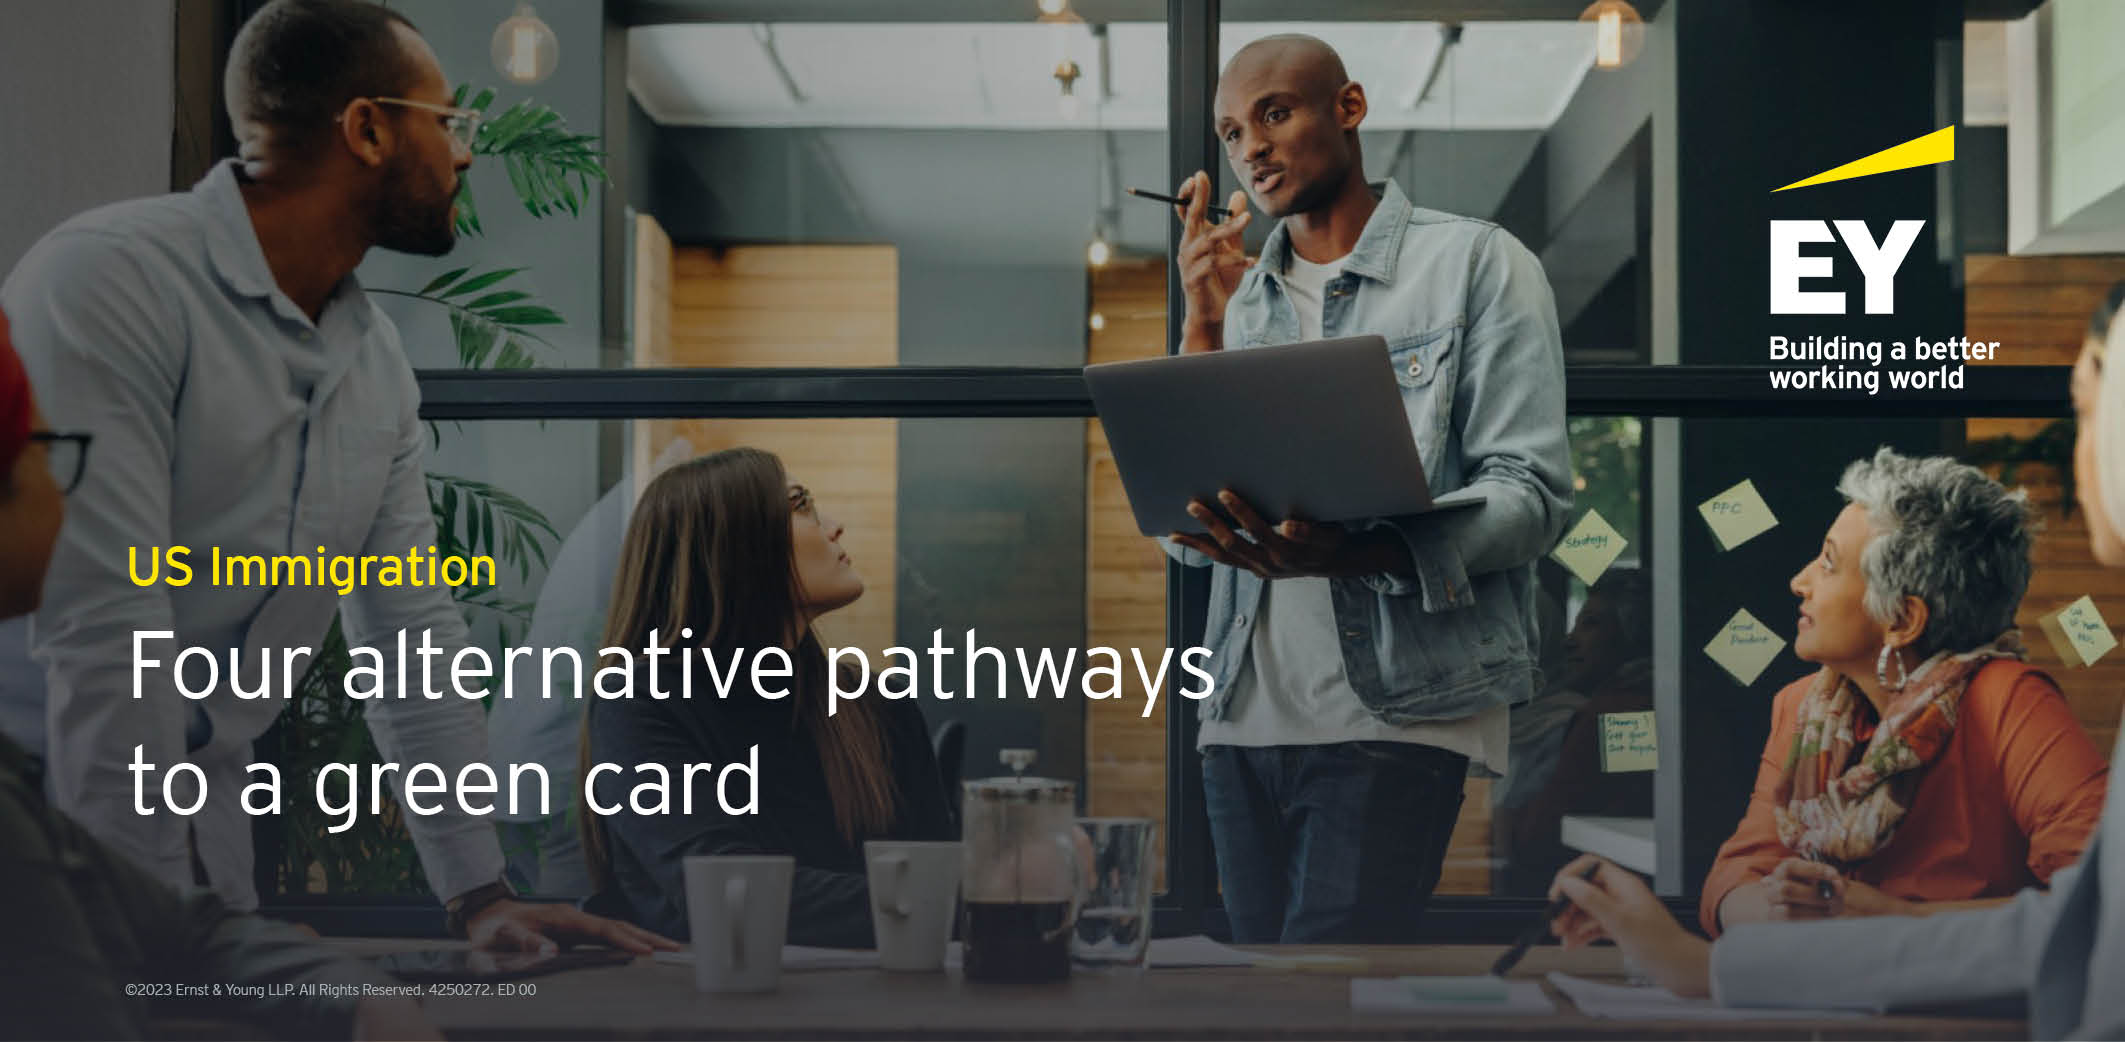 EY - Four alternative pathways to a green card